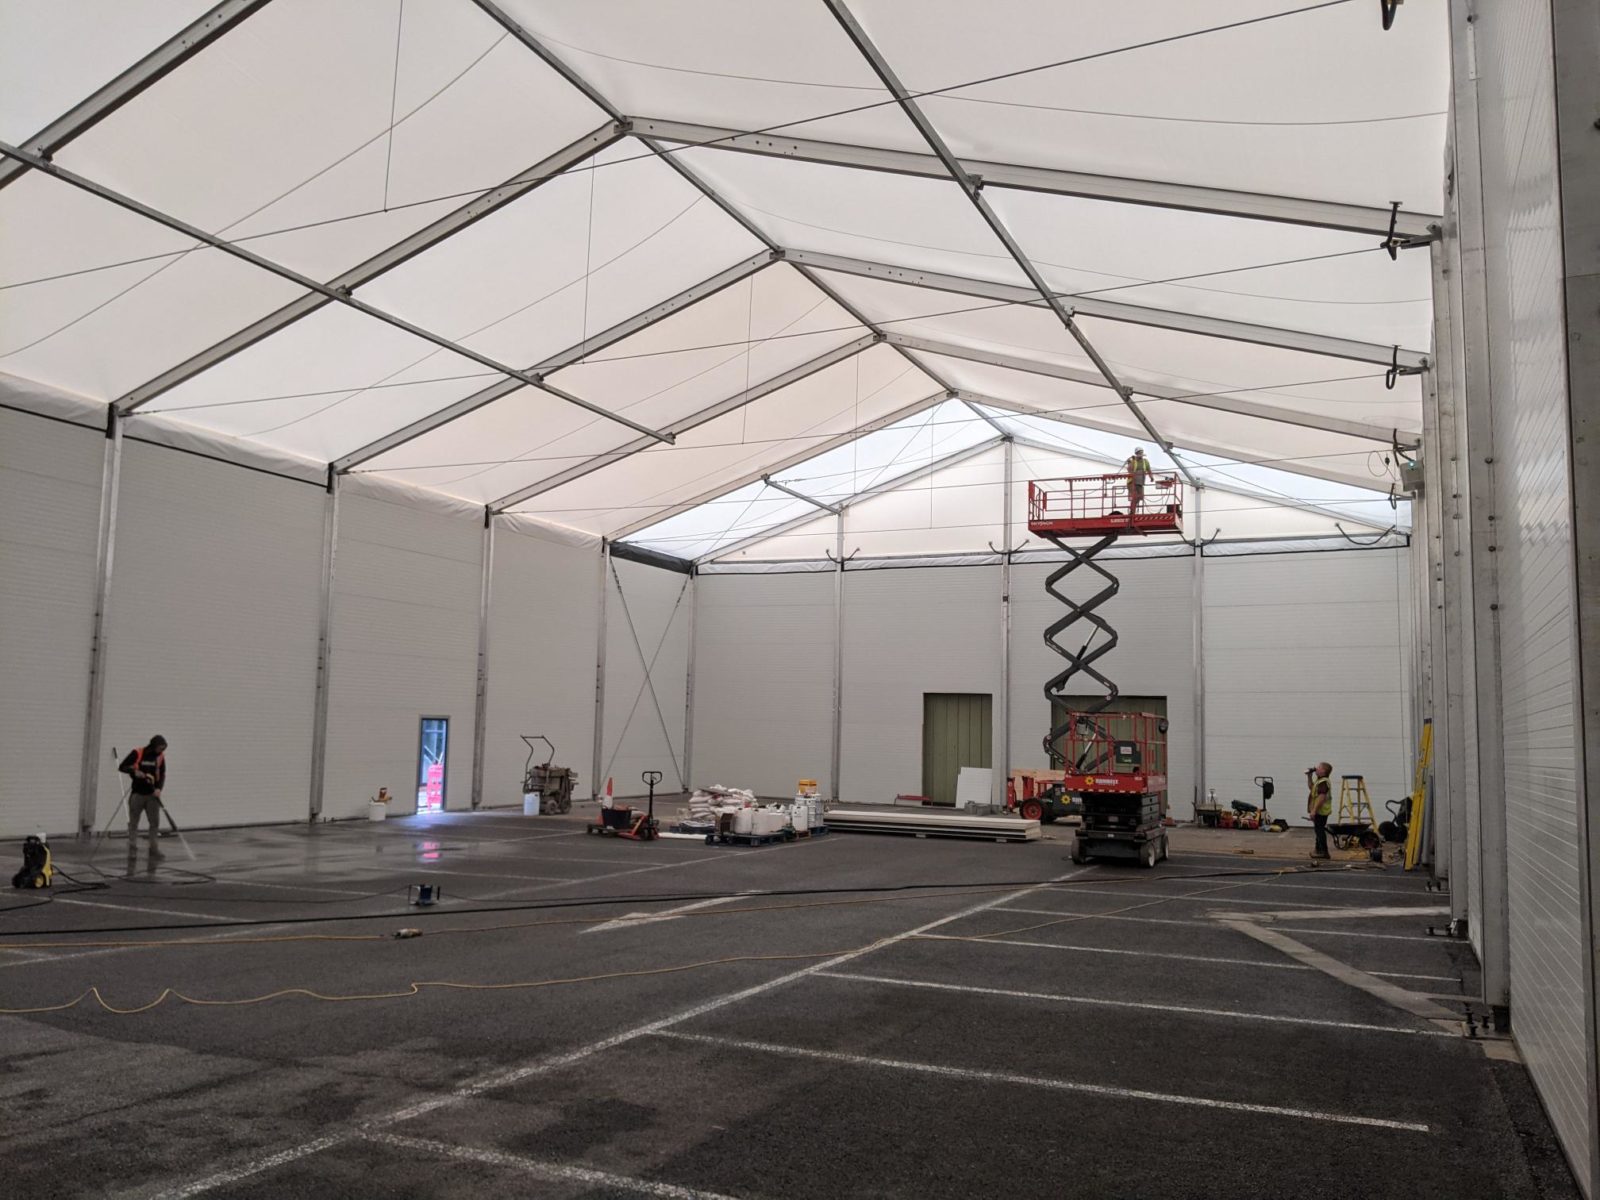 A temporary building installations for fruit coldstorage